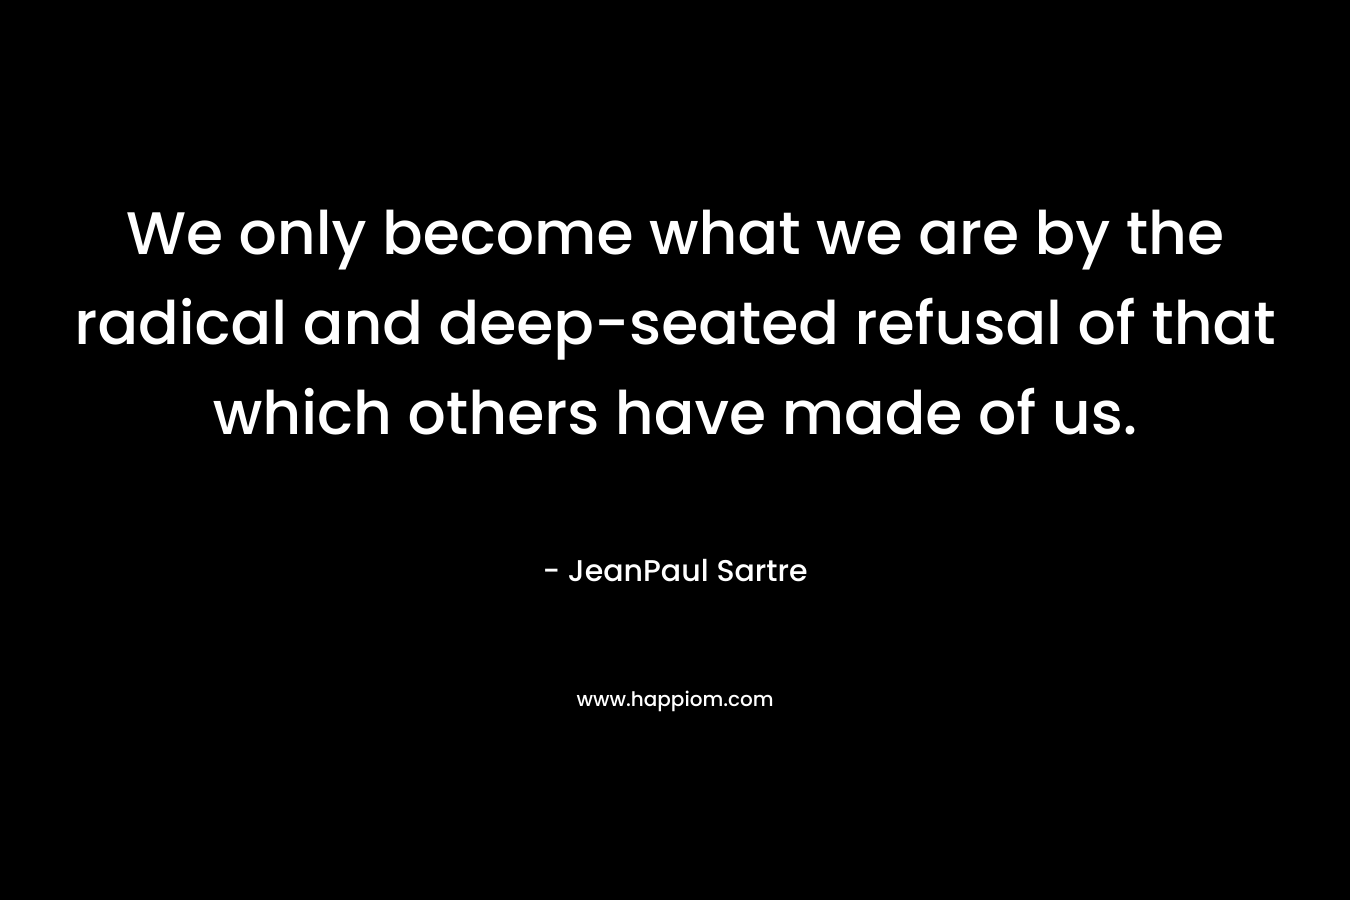 We only become what we are by the radical and deep-seated refusal of that which others have made of us.